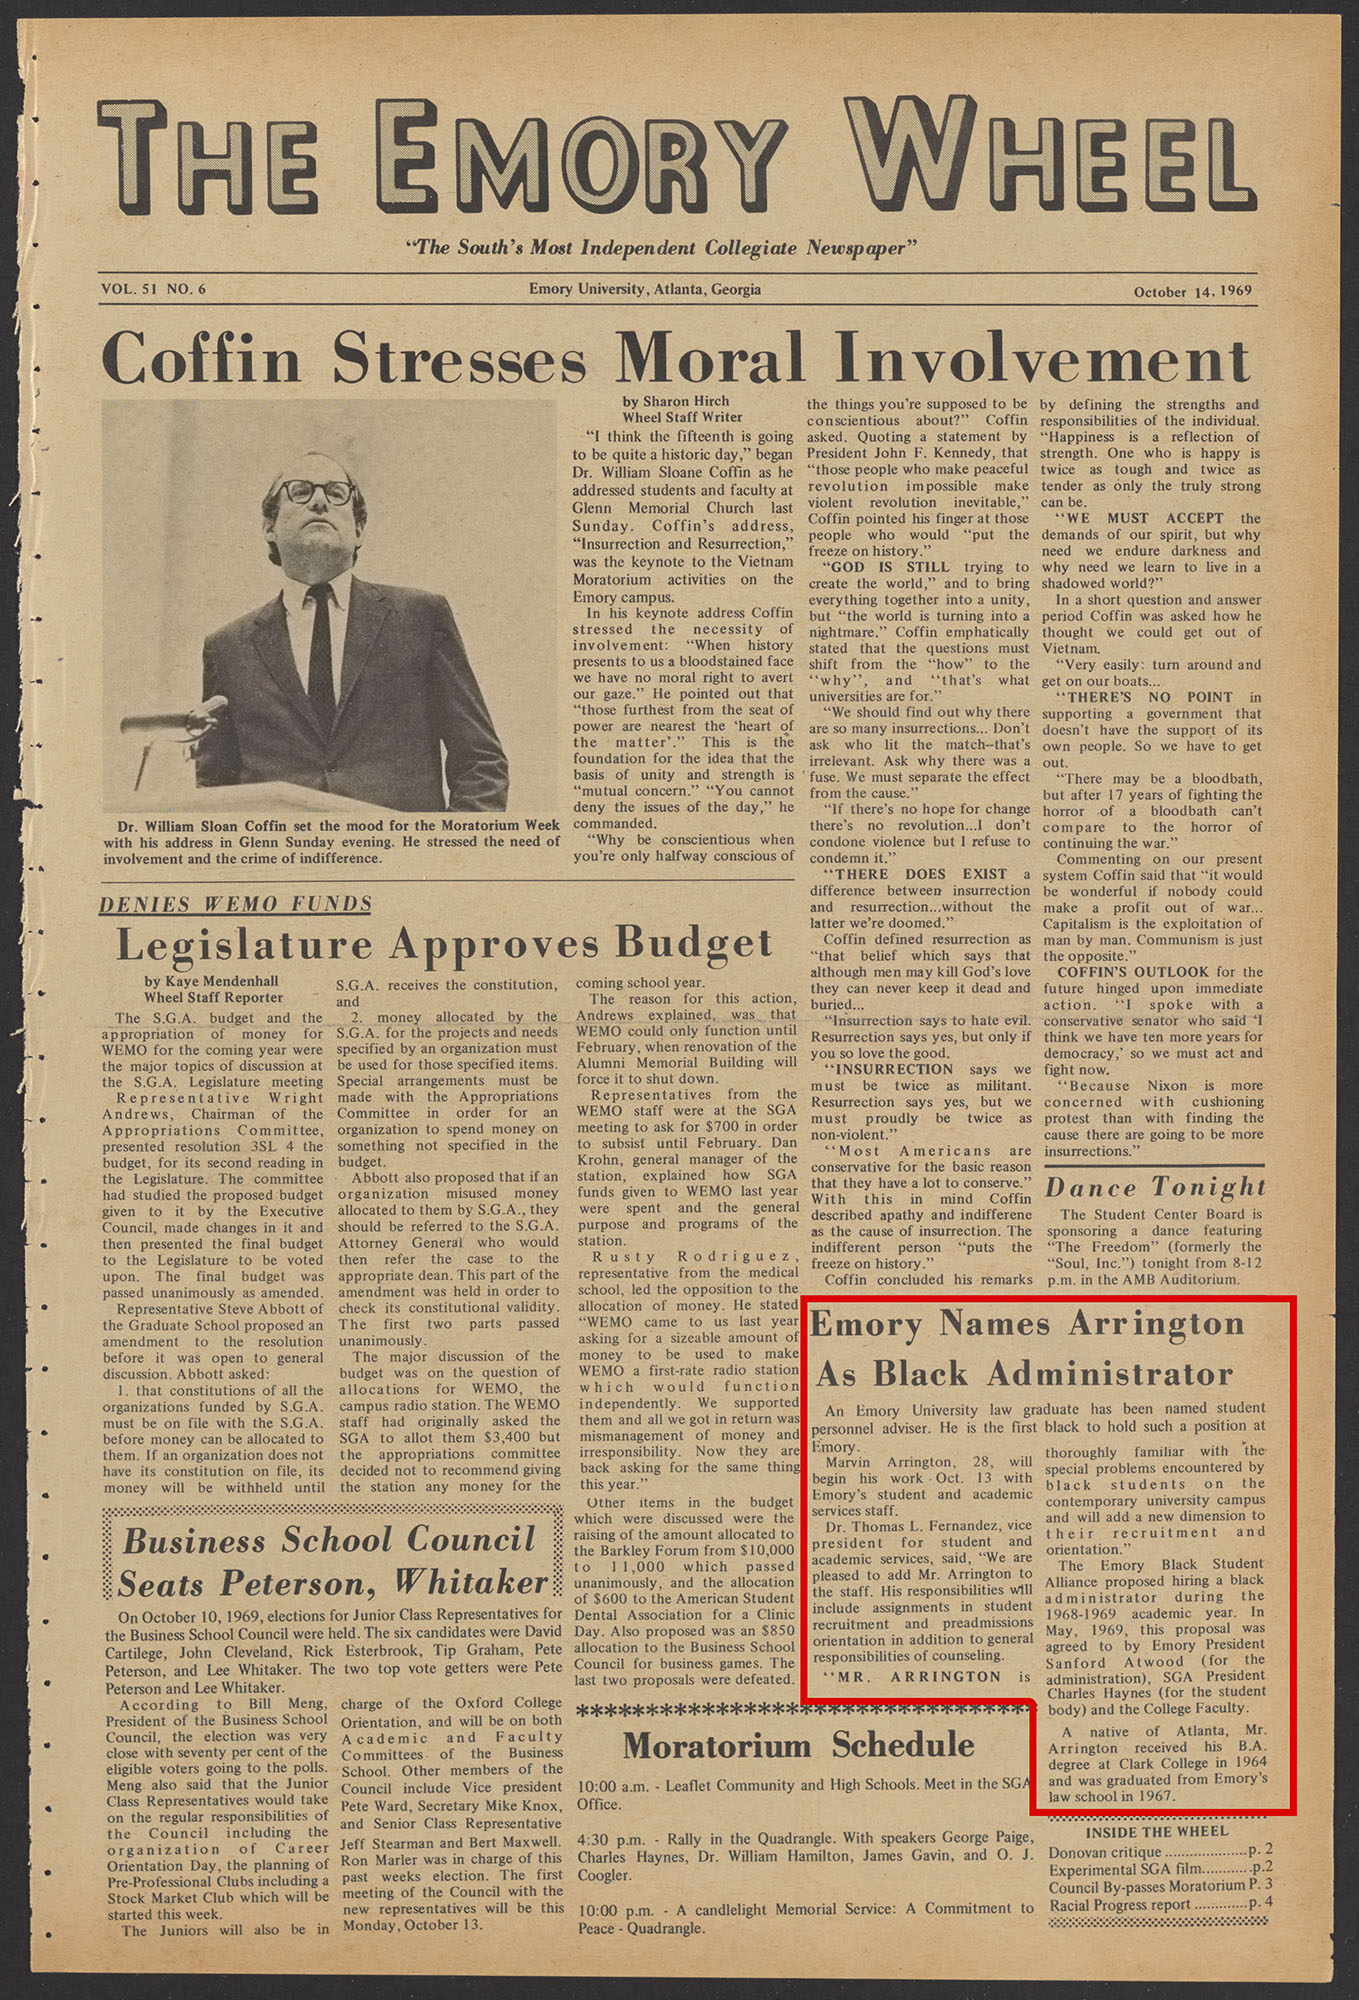 Emory Wheel newspaper front page with article on Marvin Arrington, Black administrator